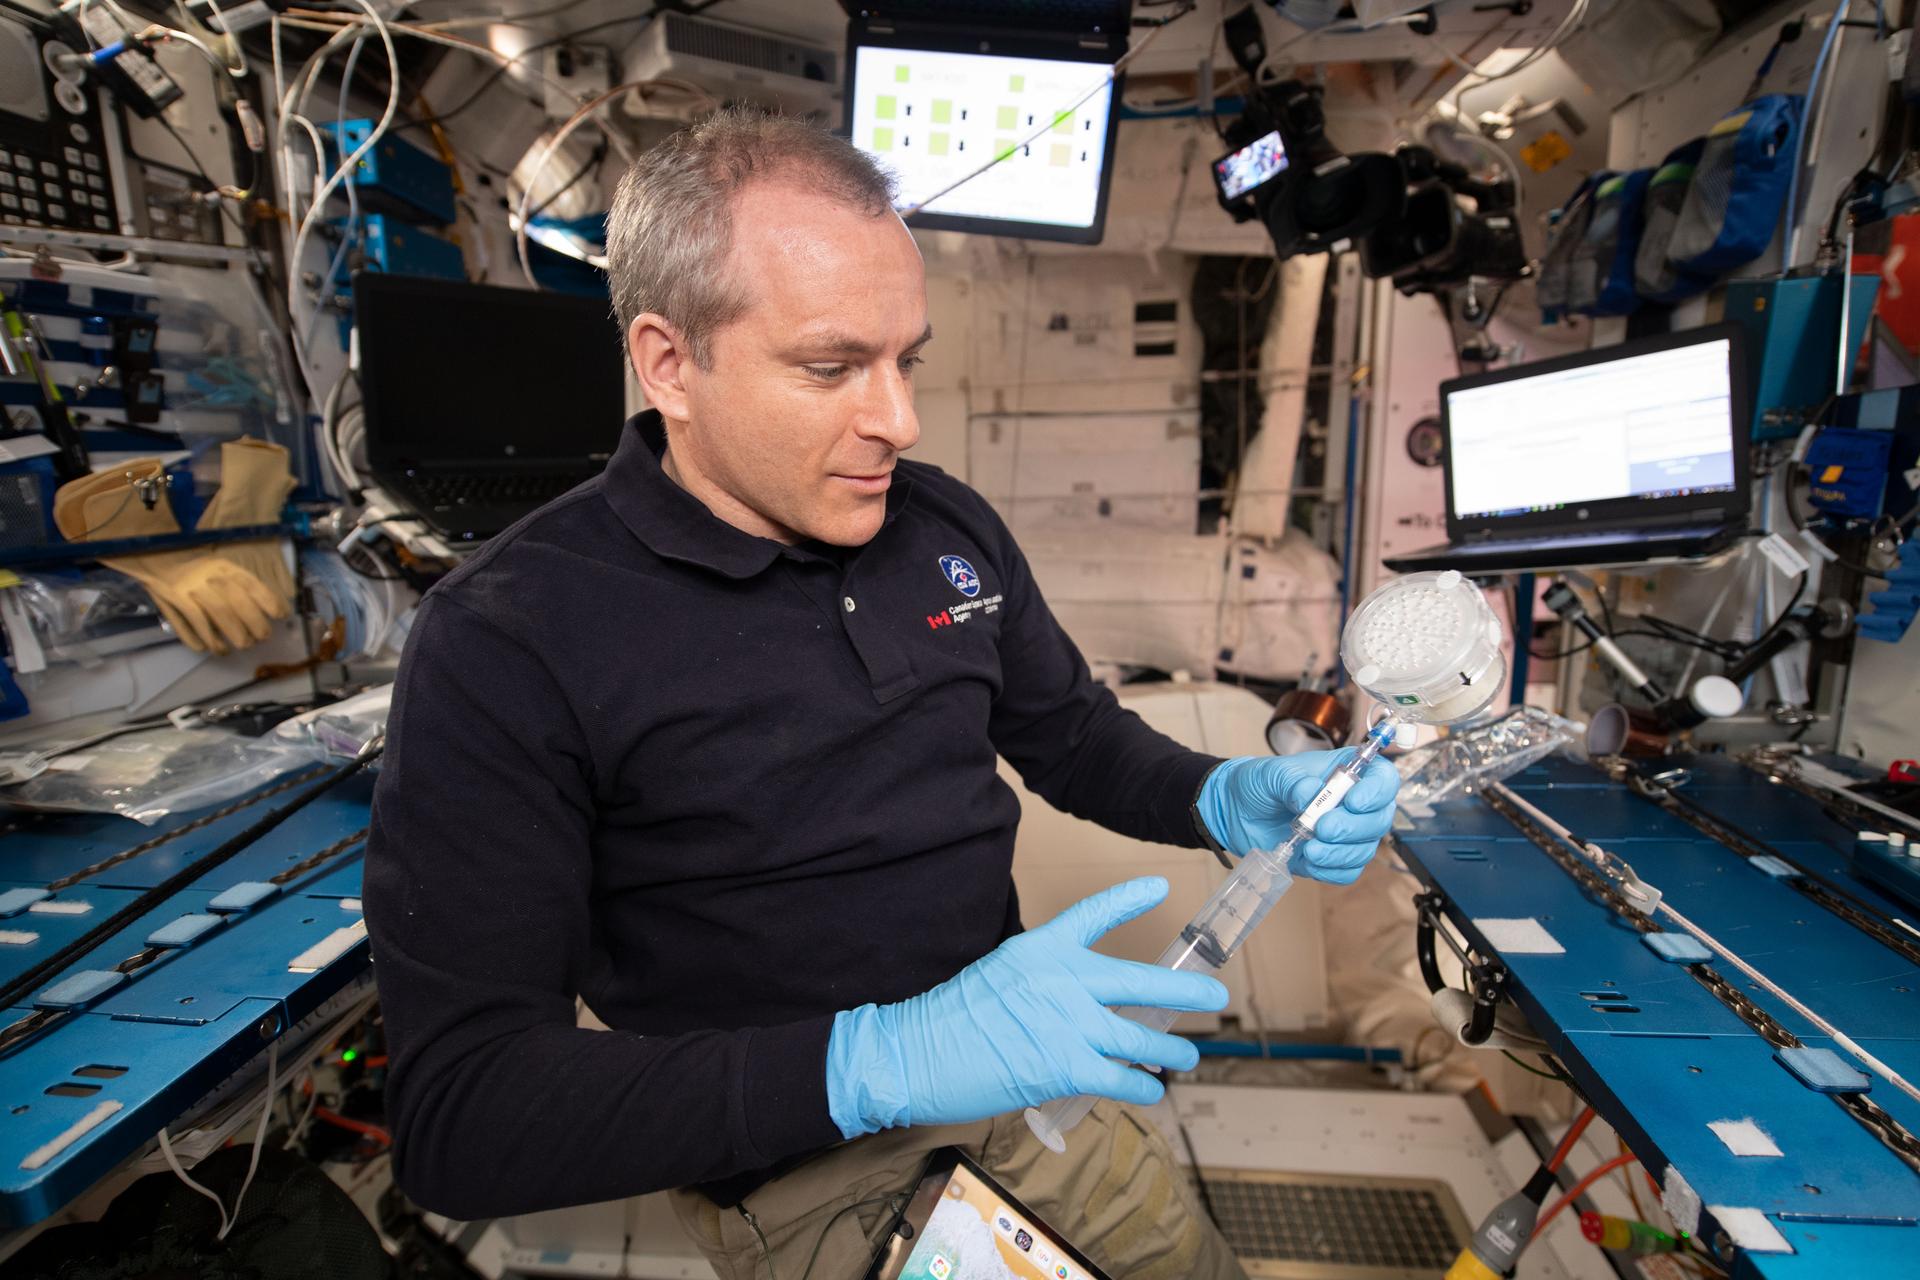 Canadian Space Agency astronaut David Saint-Jacques is shown initializing the BioNutirents investigation by hydrating the growth packets onboard the International Space Station (ISS).